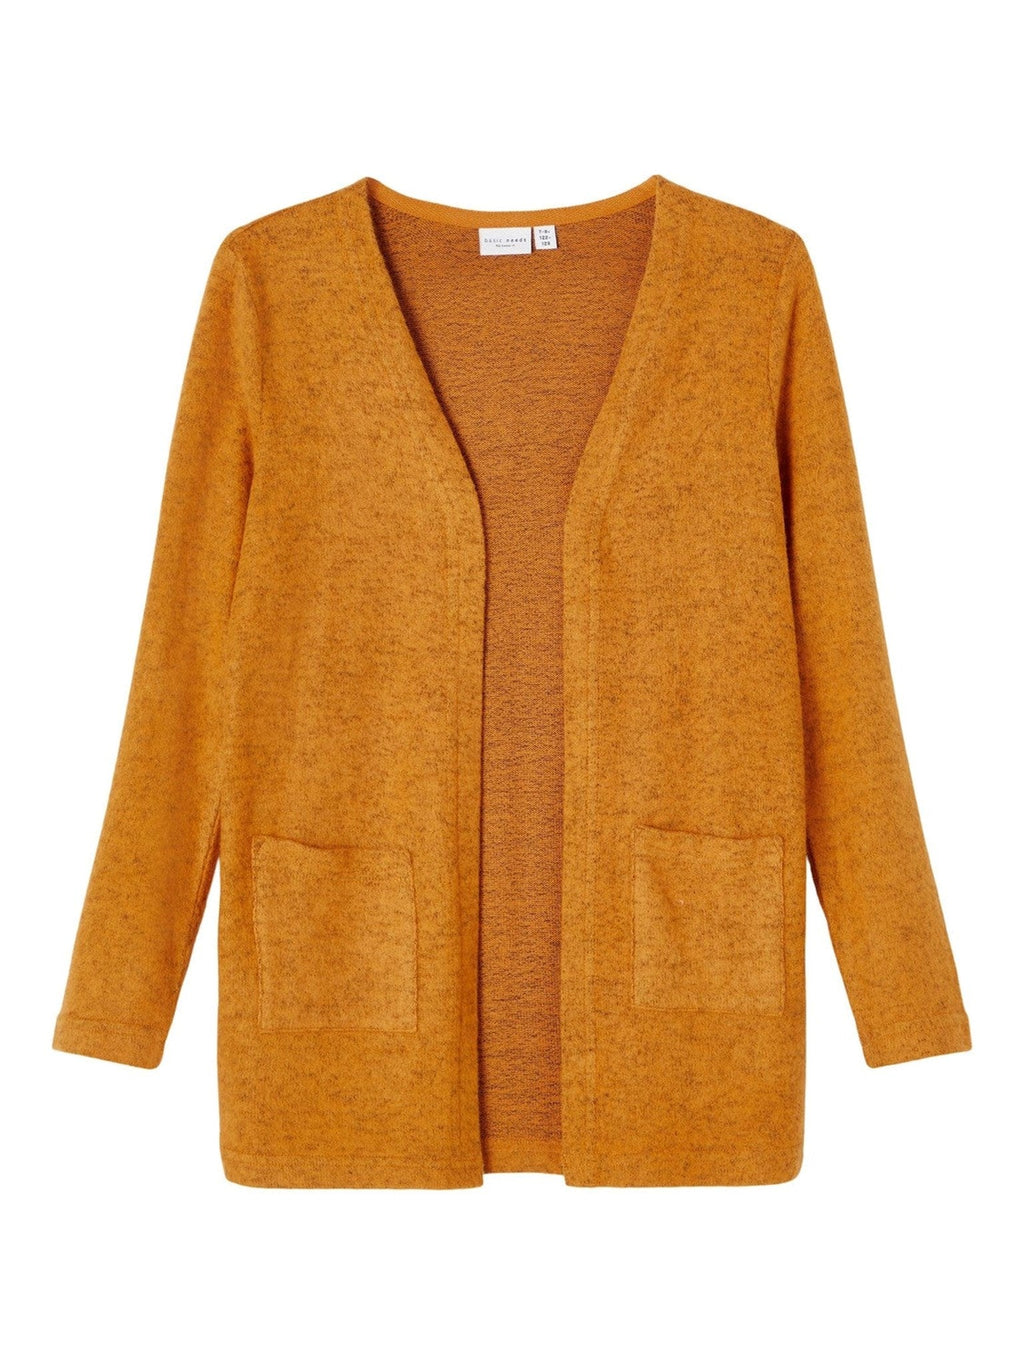 Cardigan vict tricot - Thai Curry